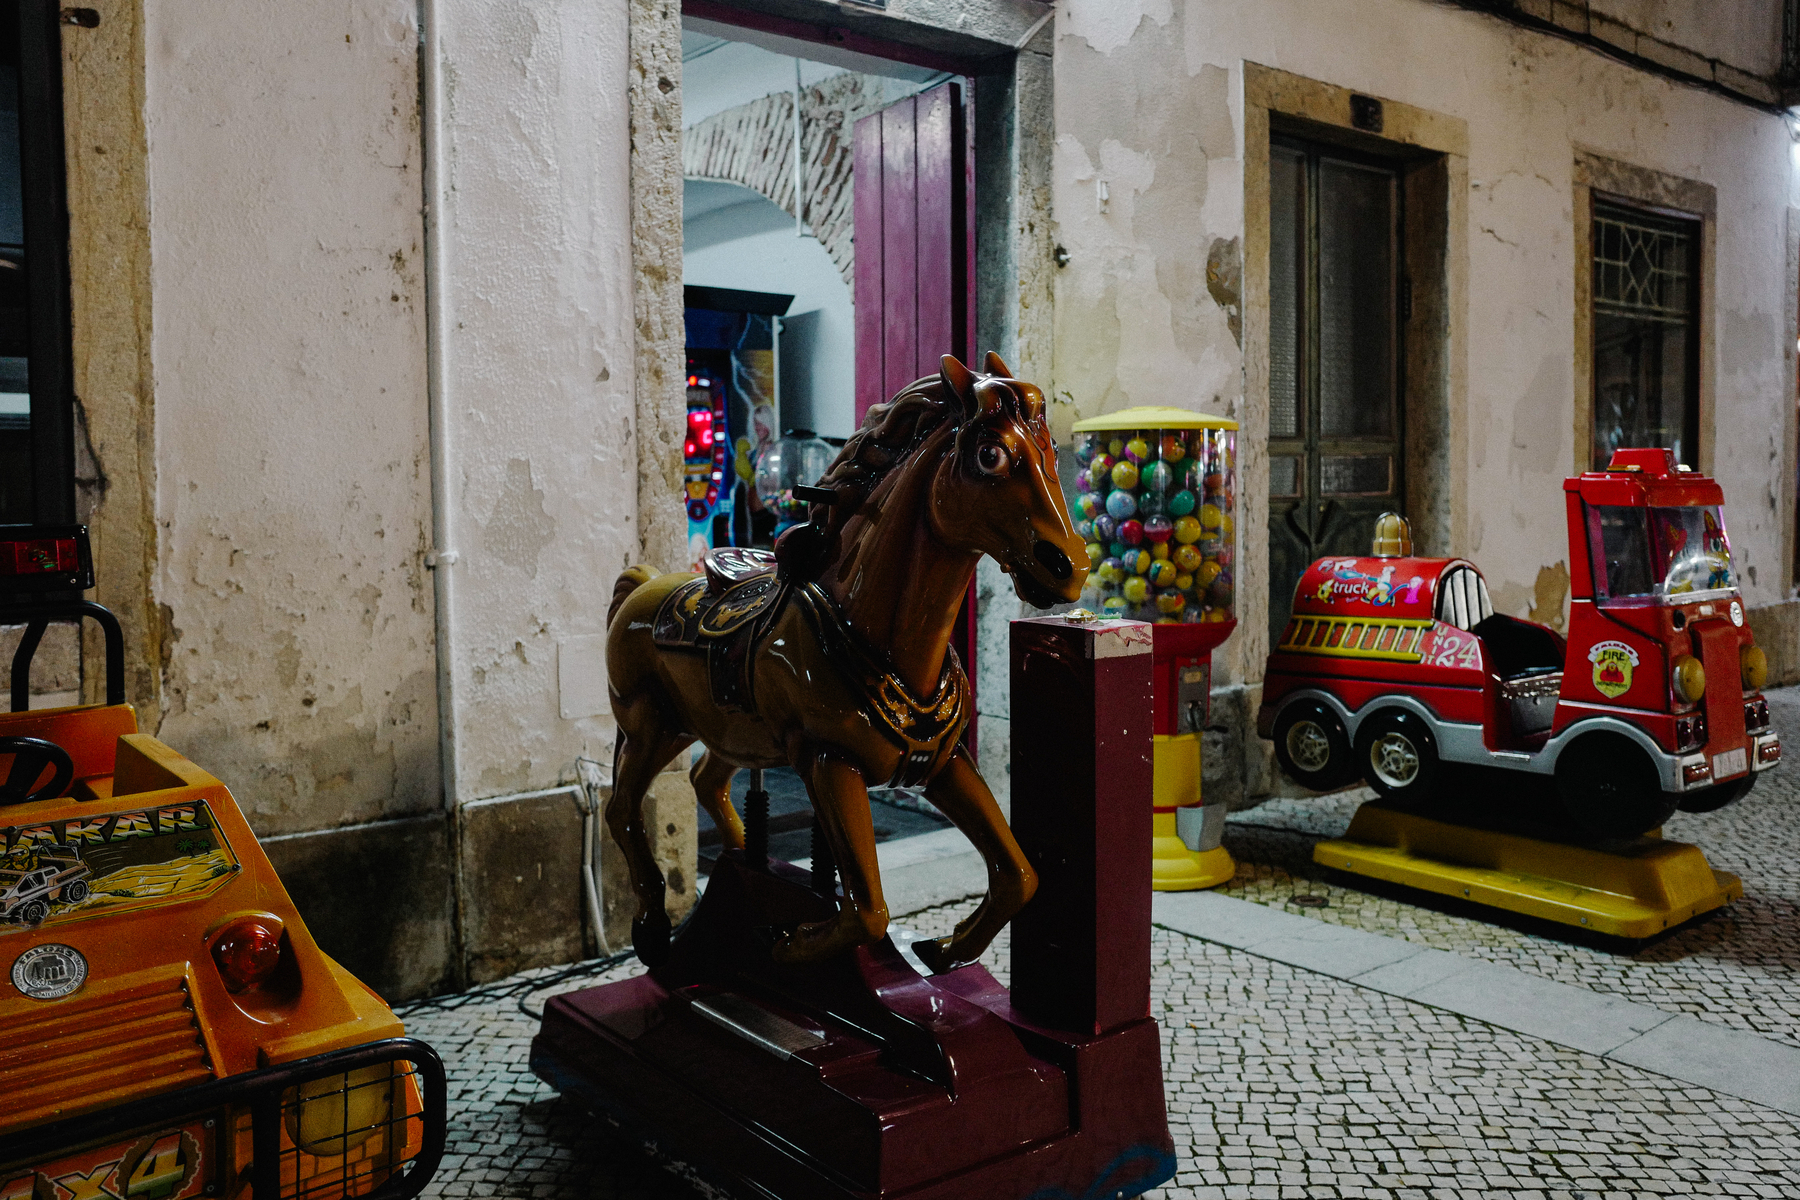 A coin-operated ride-on horse, a mini off-road vehicle, and fire truck for children beside a gumball machine, set on a cobblestone street against an old building with peeling paint.